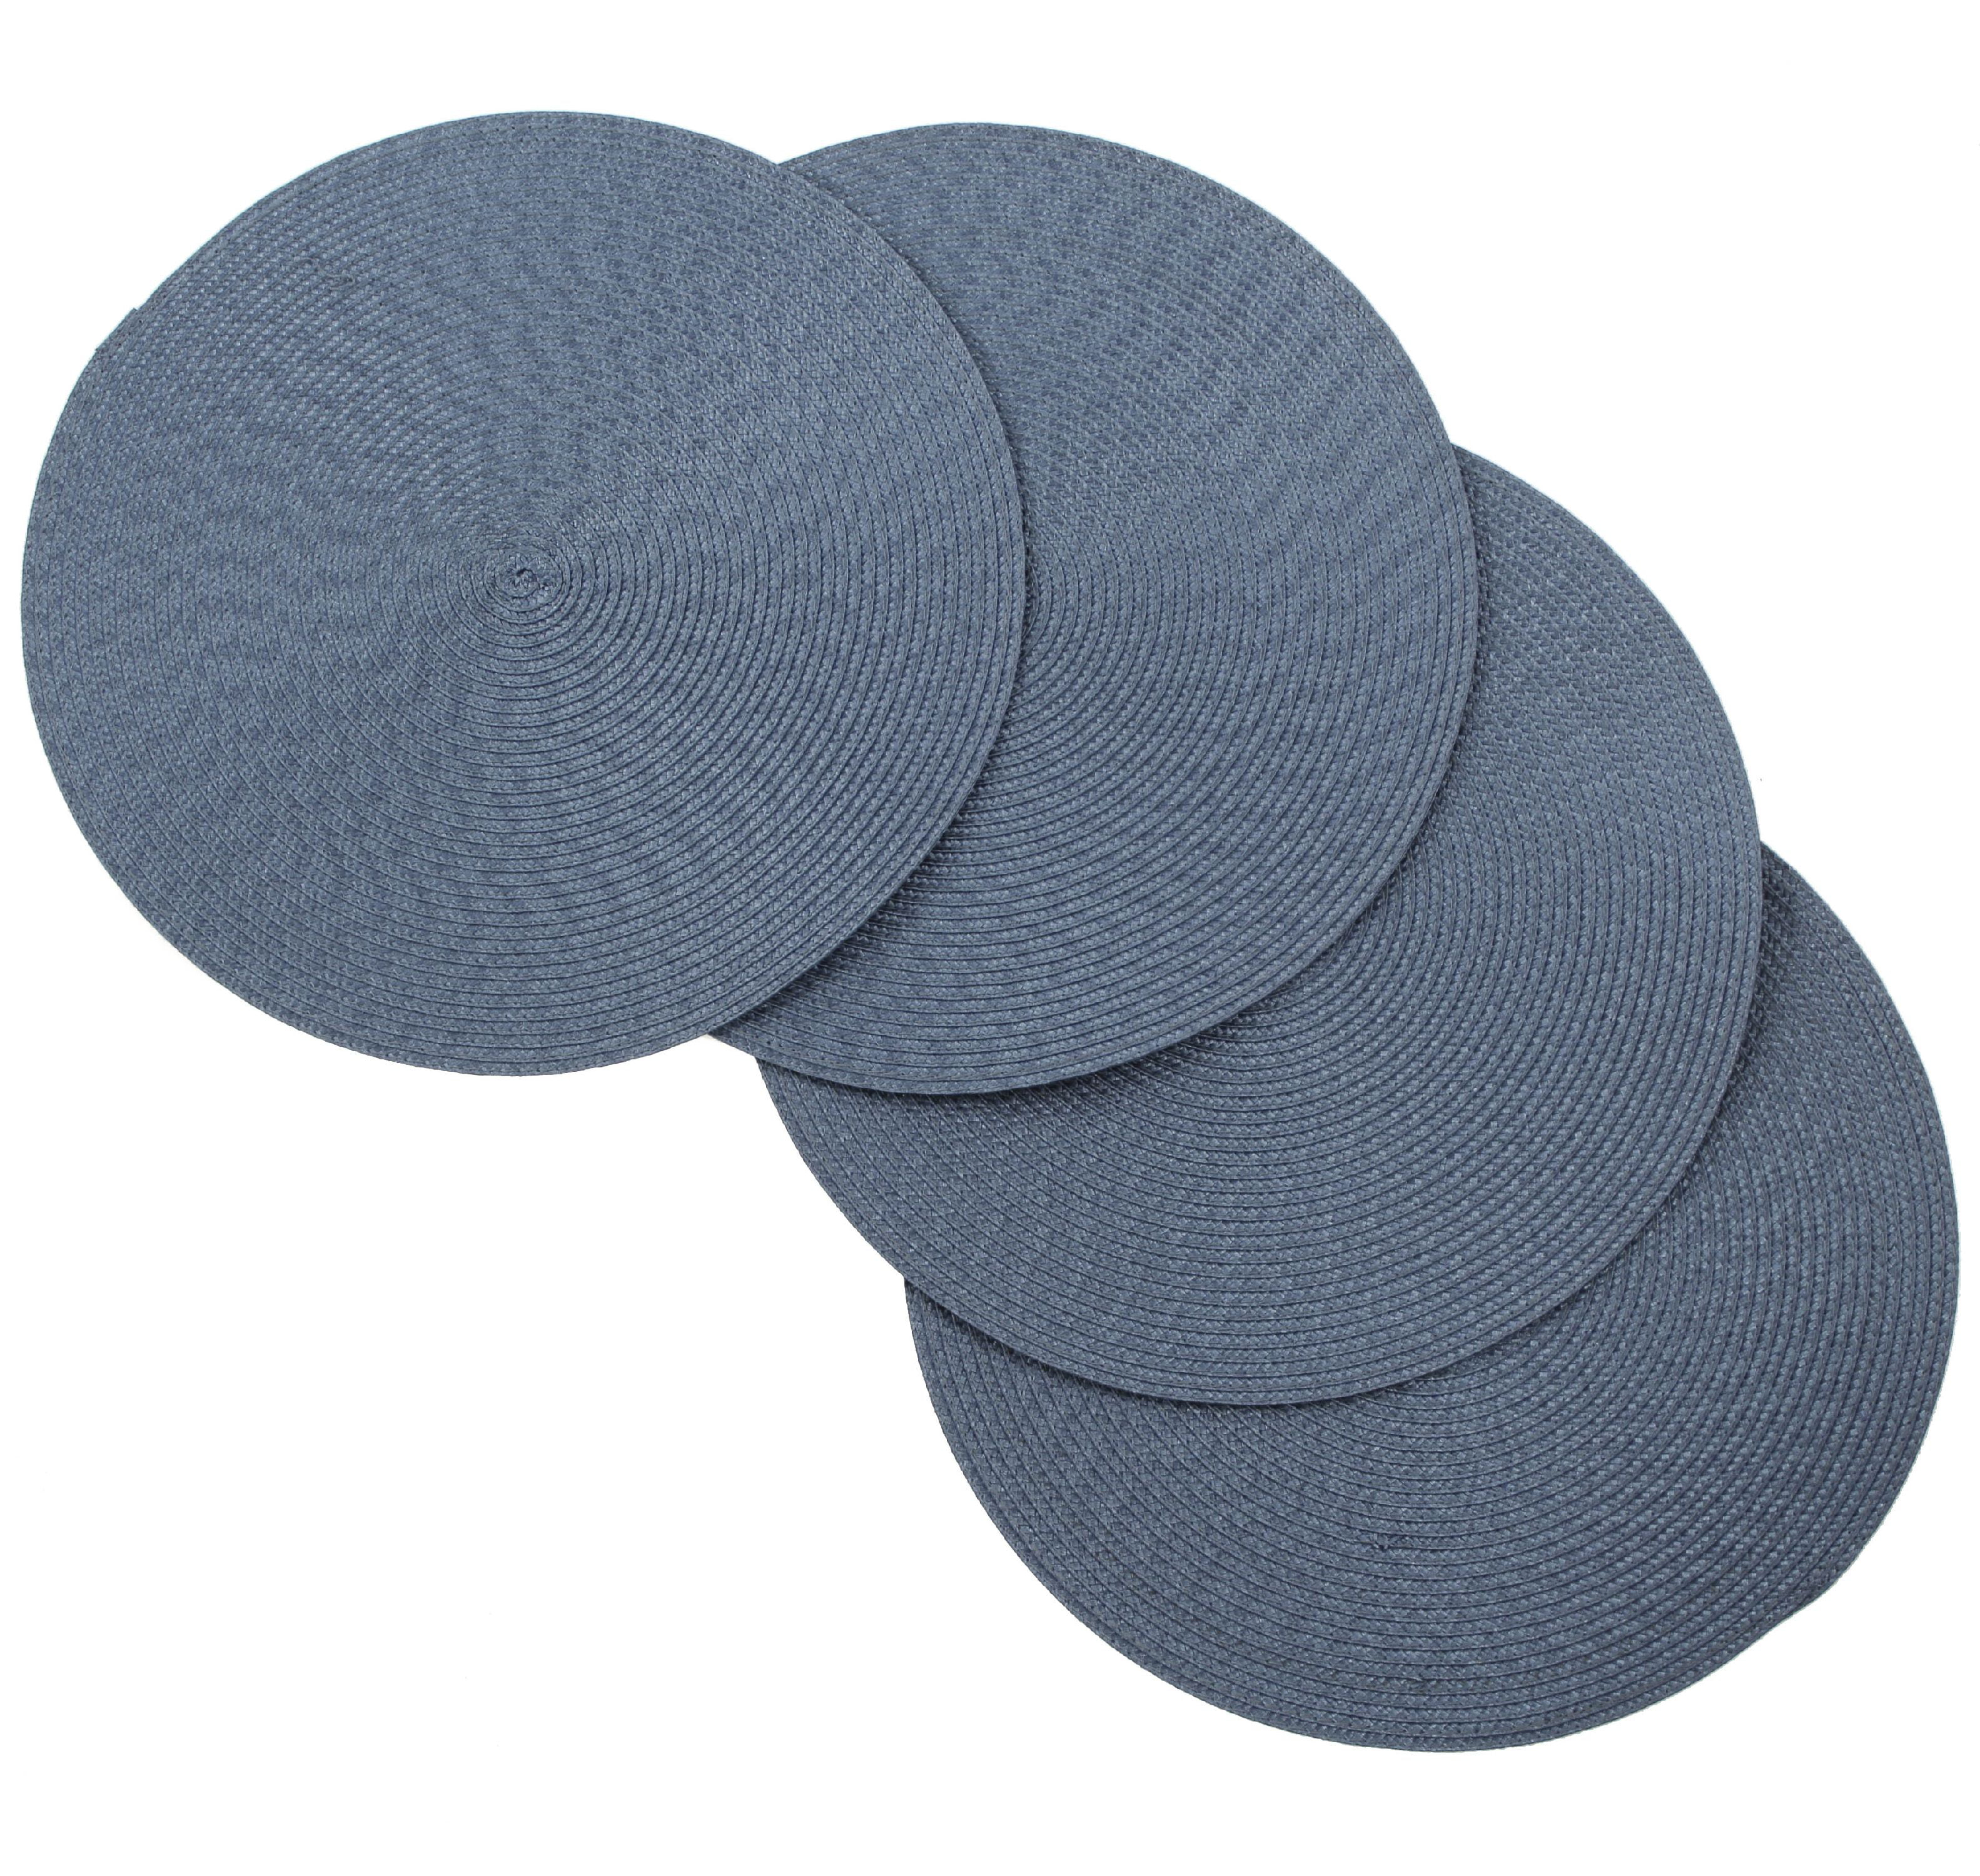 Vienna Woven Spiral Table Placemats 15, Navy Blue Round Placemats